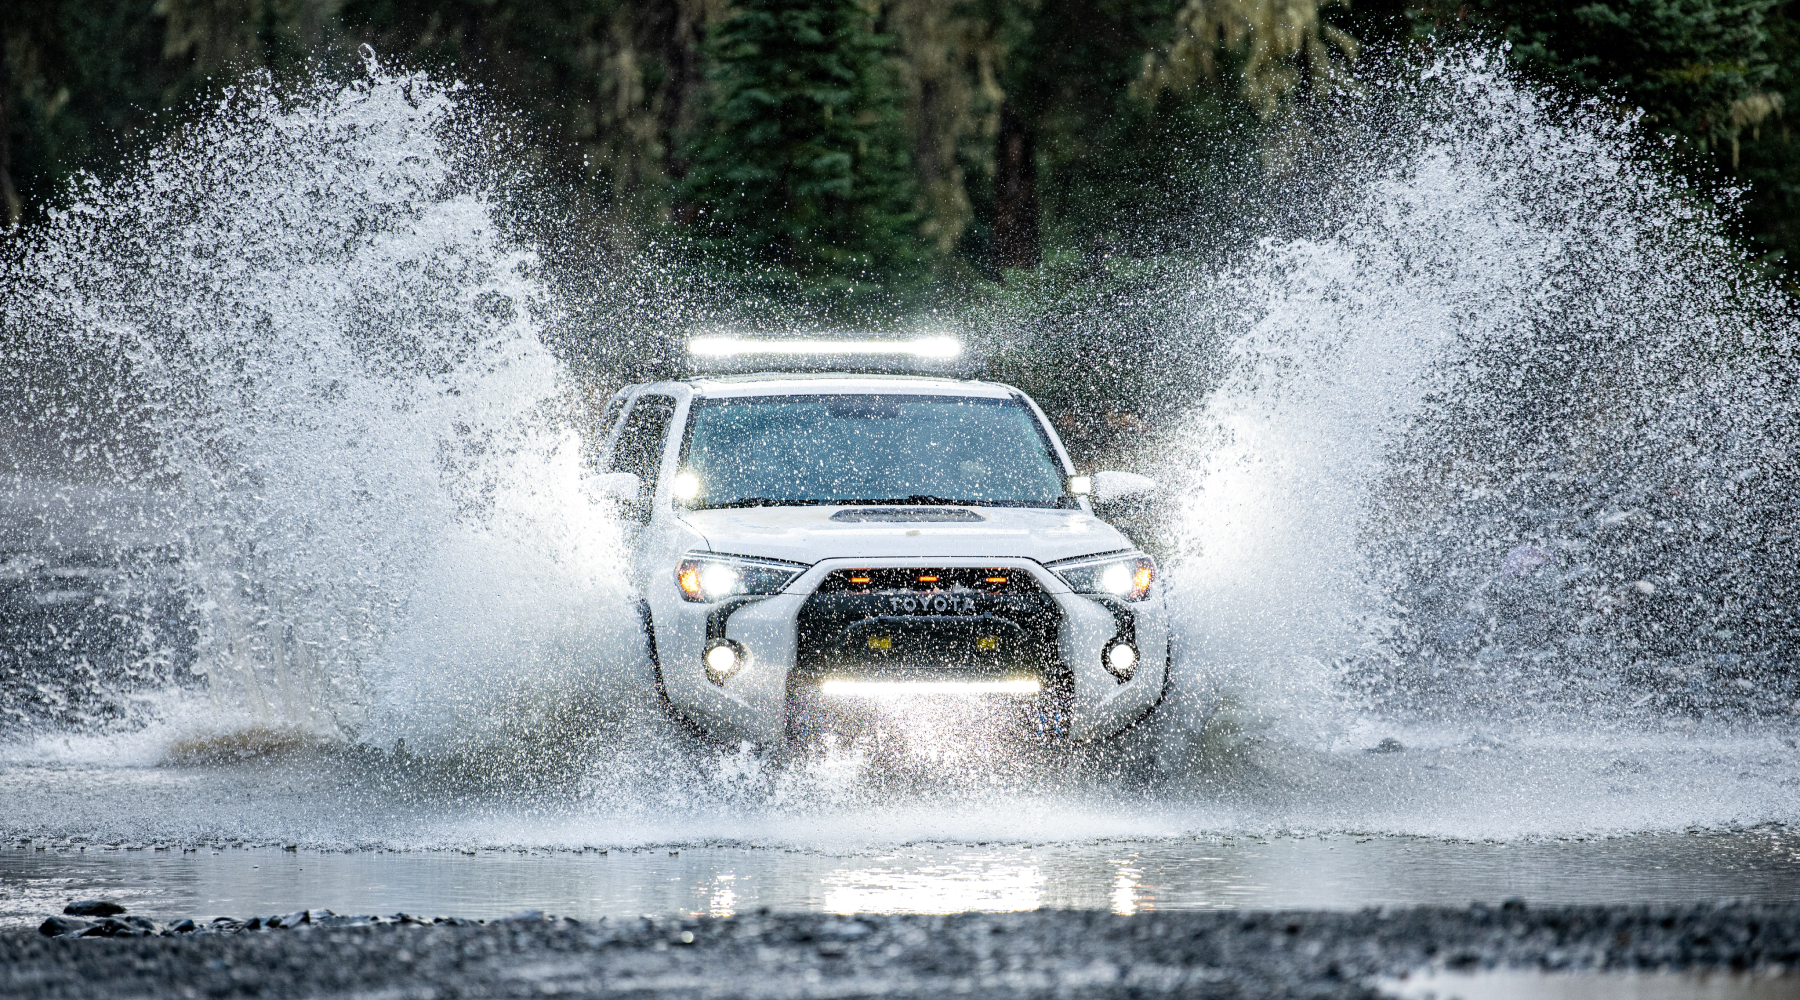 White Toyota 4 Runner crosses a river with black rock beach.